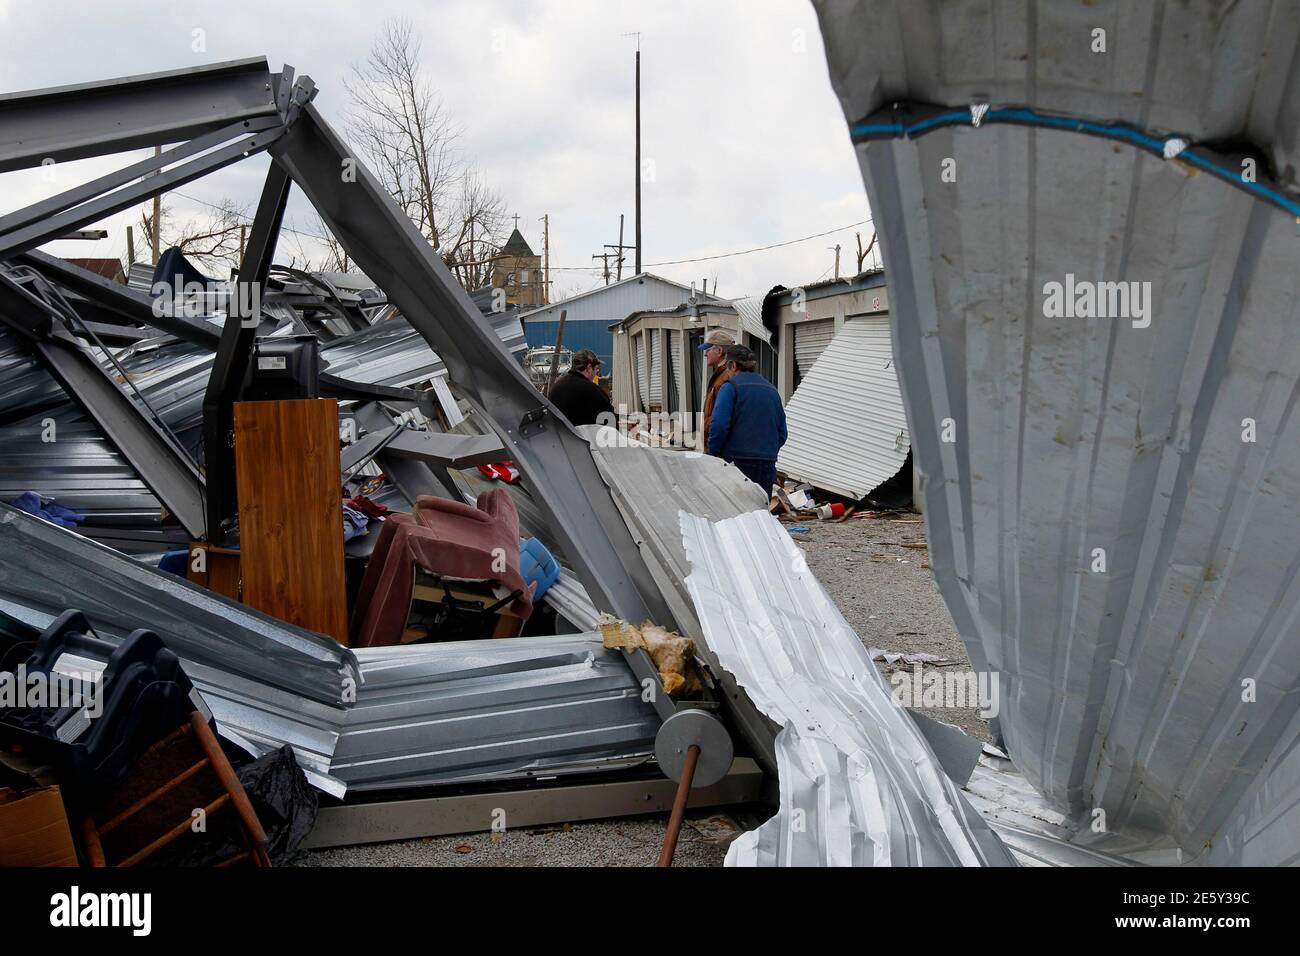 Residents look through twisted steel for their belongings at a self-storage facility in Henryville, Indiana March 4, 2012. Calm weather gave dazed residents of storm-wracked towns a respite early on Sunday as they dug out from a chain of tornadoes that cut a swath of destruction, killing at least 39 people.   REUTERS/John Sommers II (UNITED STATES - Tags: DISASTER ENVIRONMENT) Stock Photo